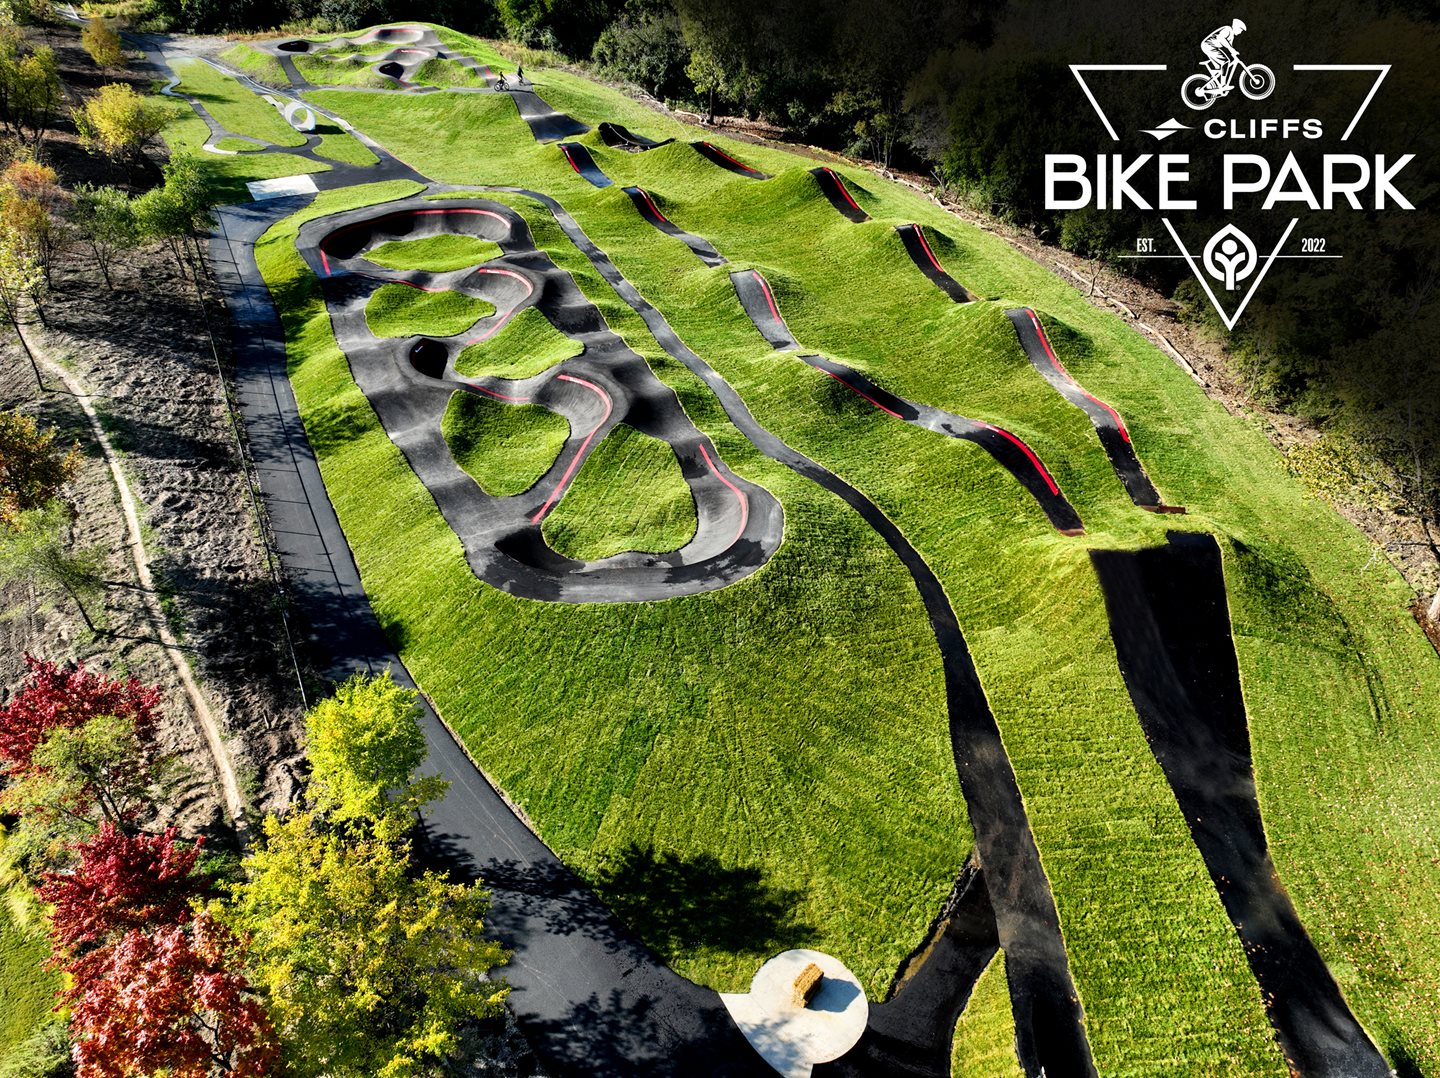 Cleveland Metroparks Announces Opening of Cleveland-Cliffs Bike Park at Ohio & Erie Canal Reservation